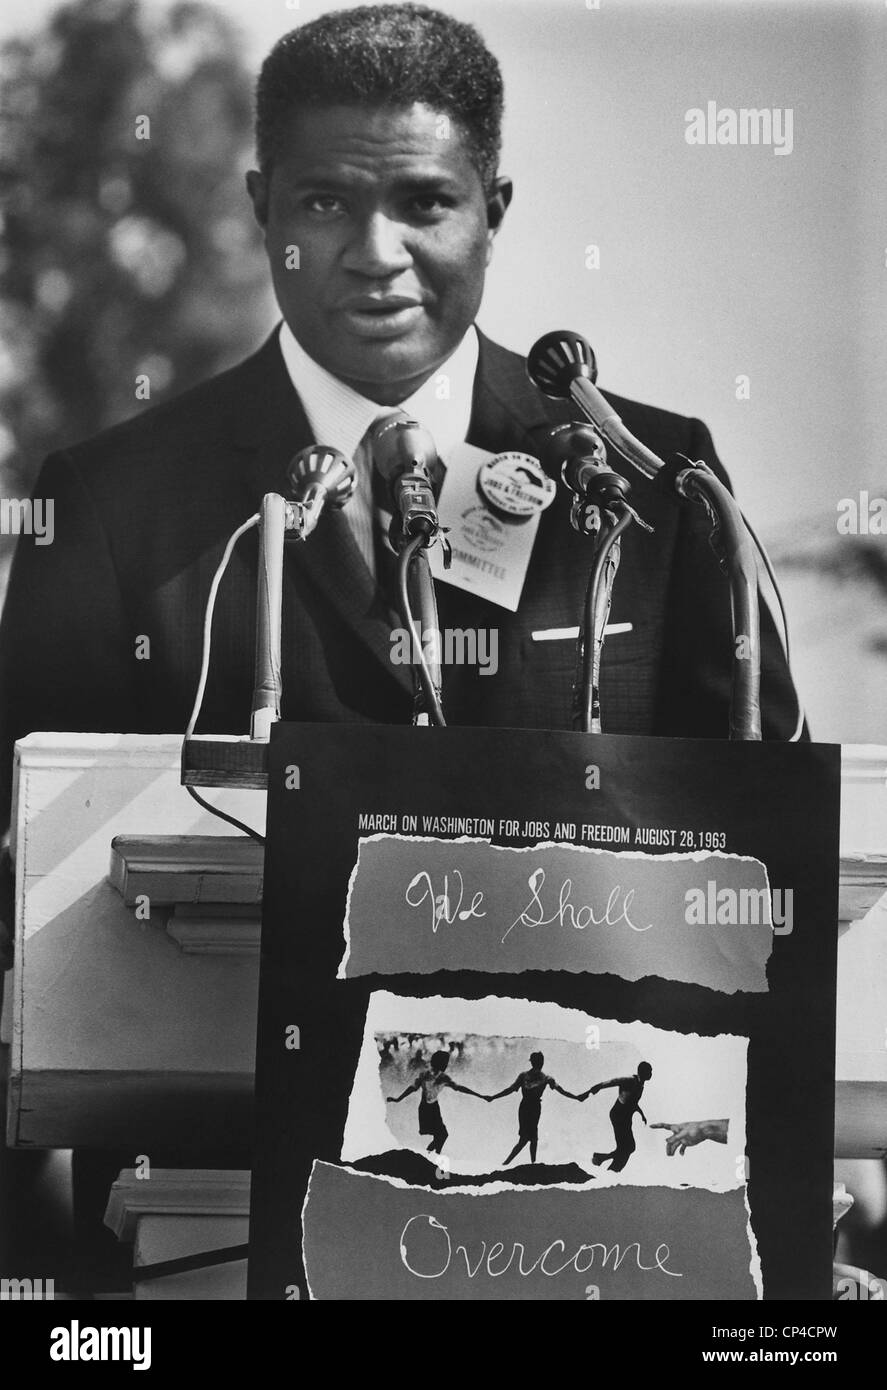 Actor Ossie Davis at the 1963 Civil Rights March on Washington. Aug. 28, 1963. Stock Photo